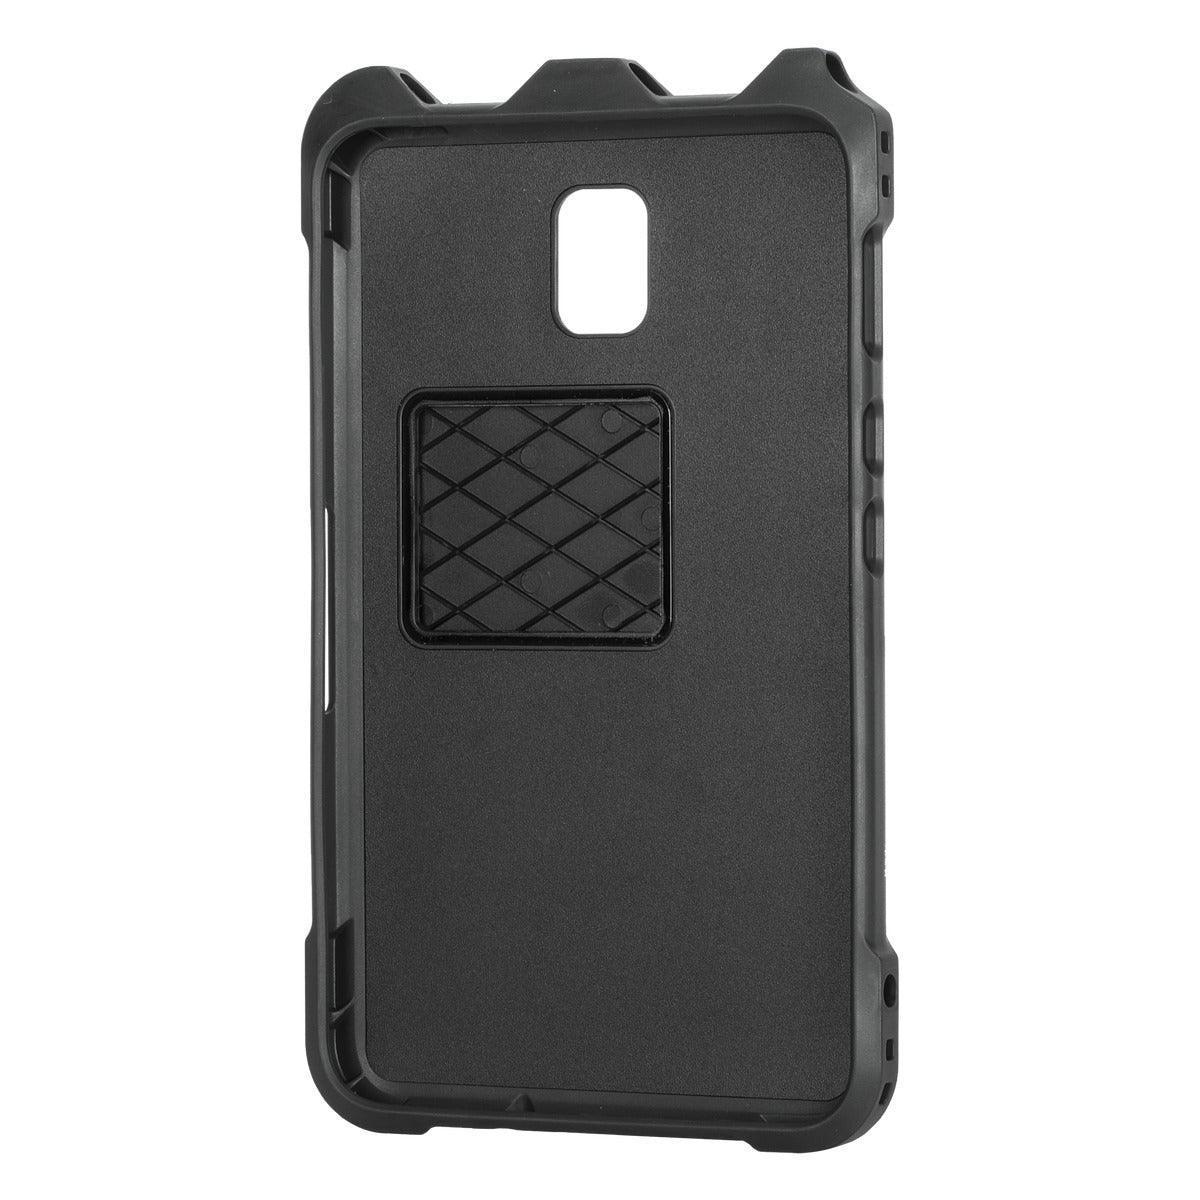 Targus Field-Ready Tablet Case for Samsung Galaxy Tab Active3 - Black - Marknet Technology